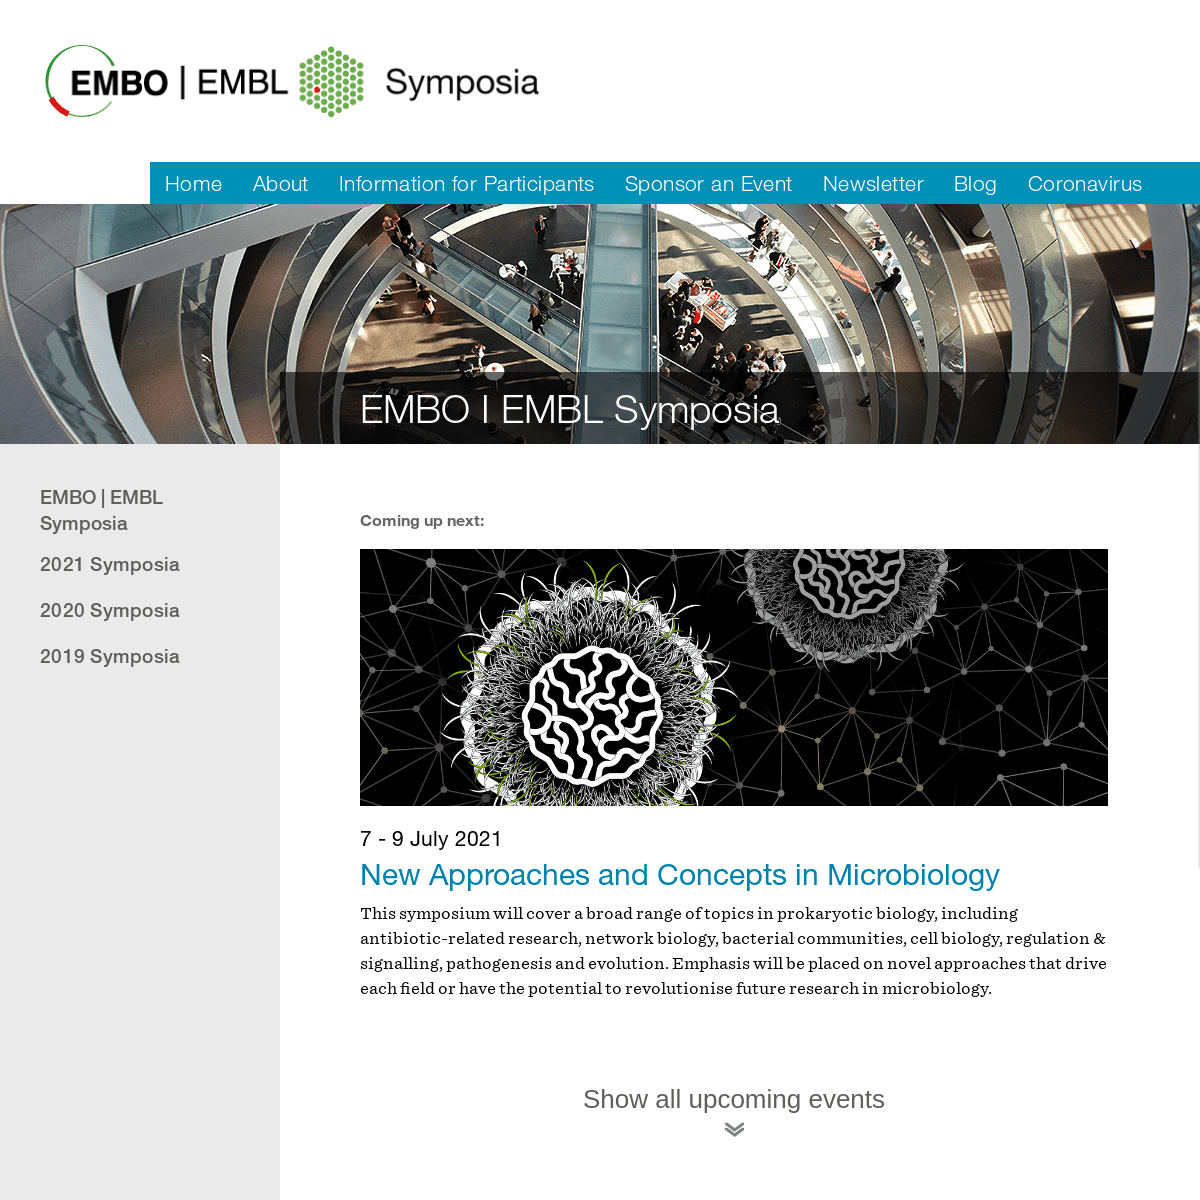 A complete backup of https://embo-embl-symposia.org